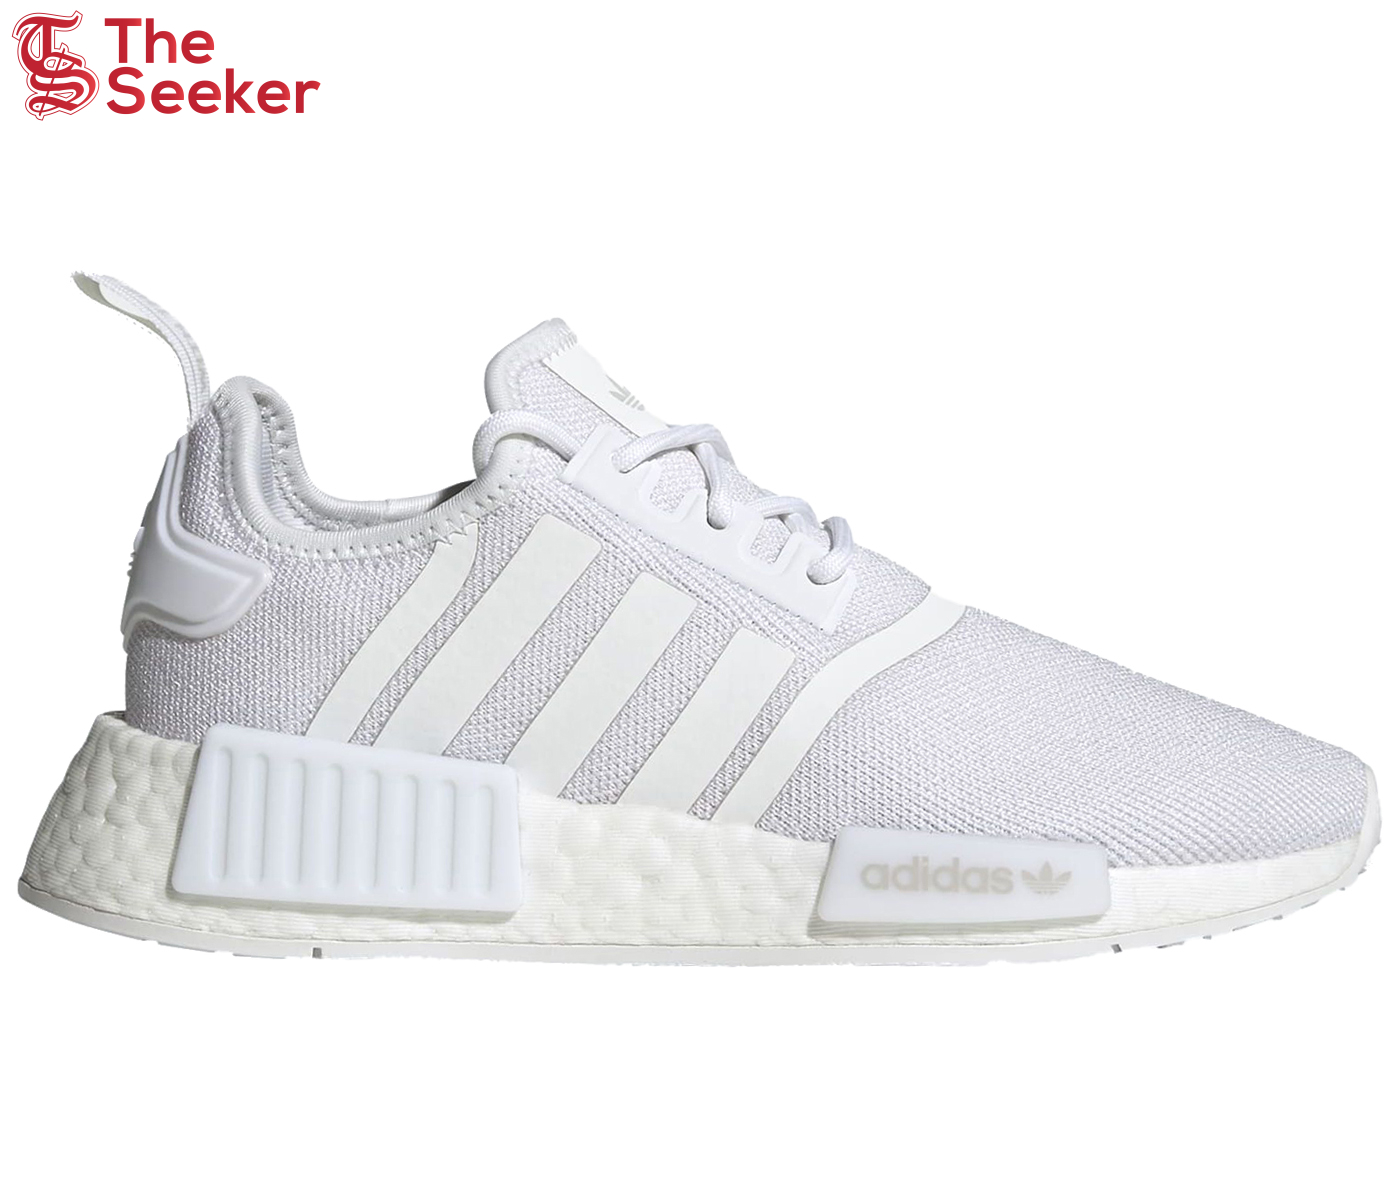 adidas NMD R1 Refined Cloud White Grey One (GS)